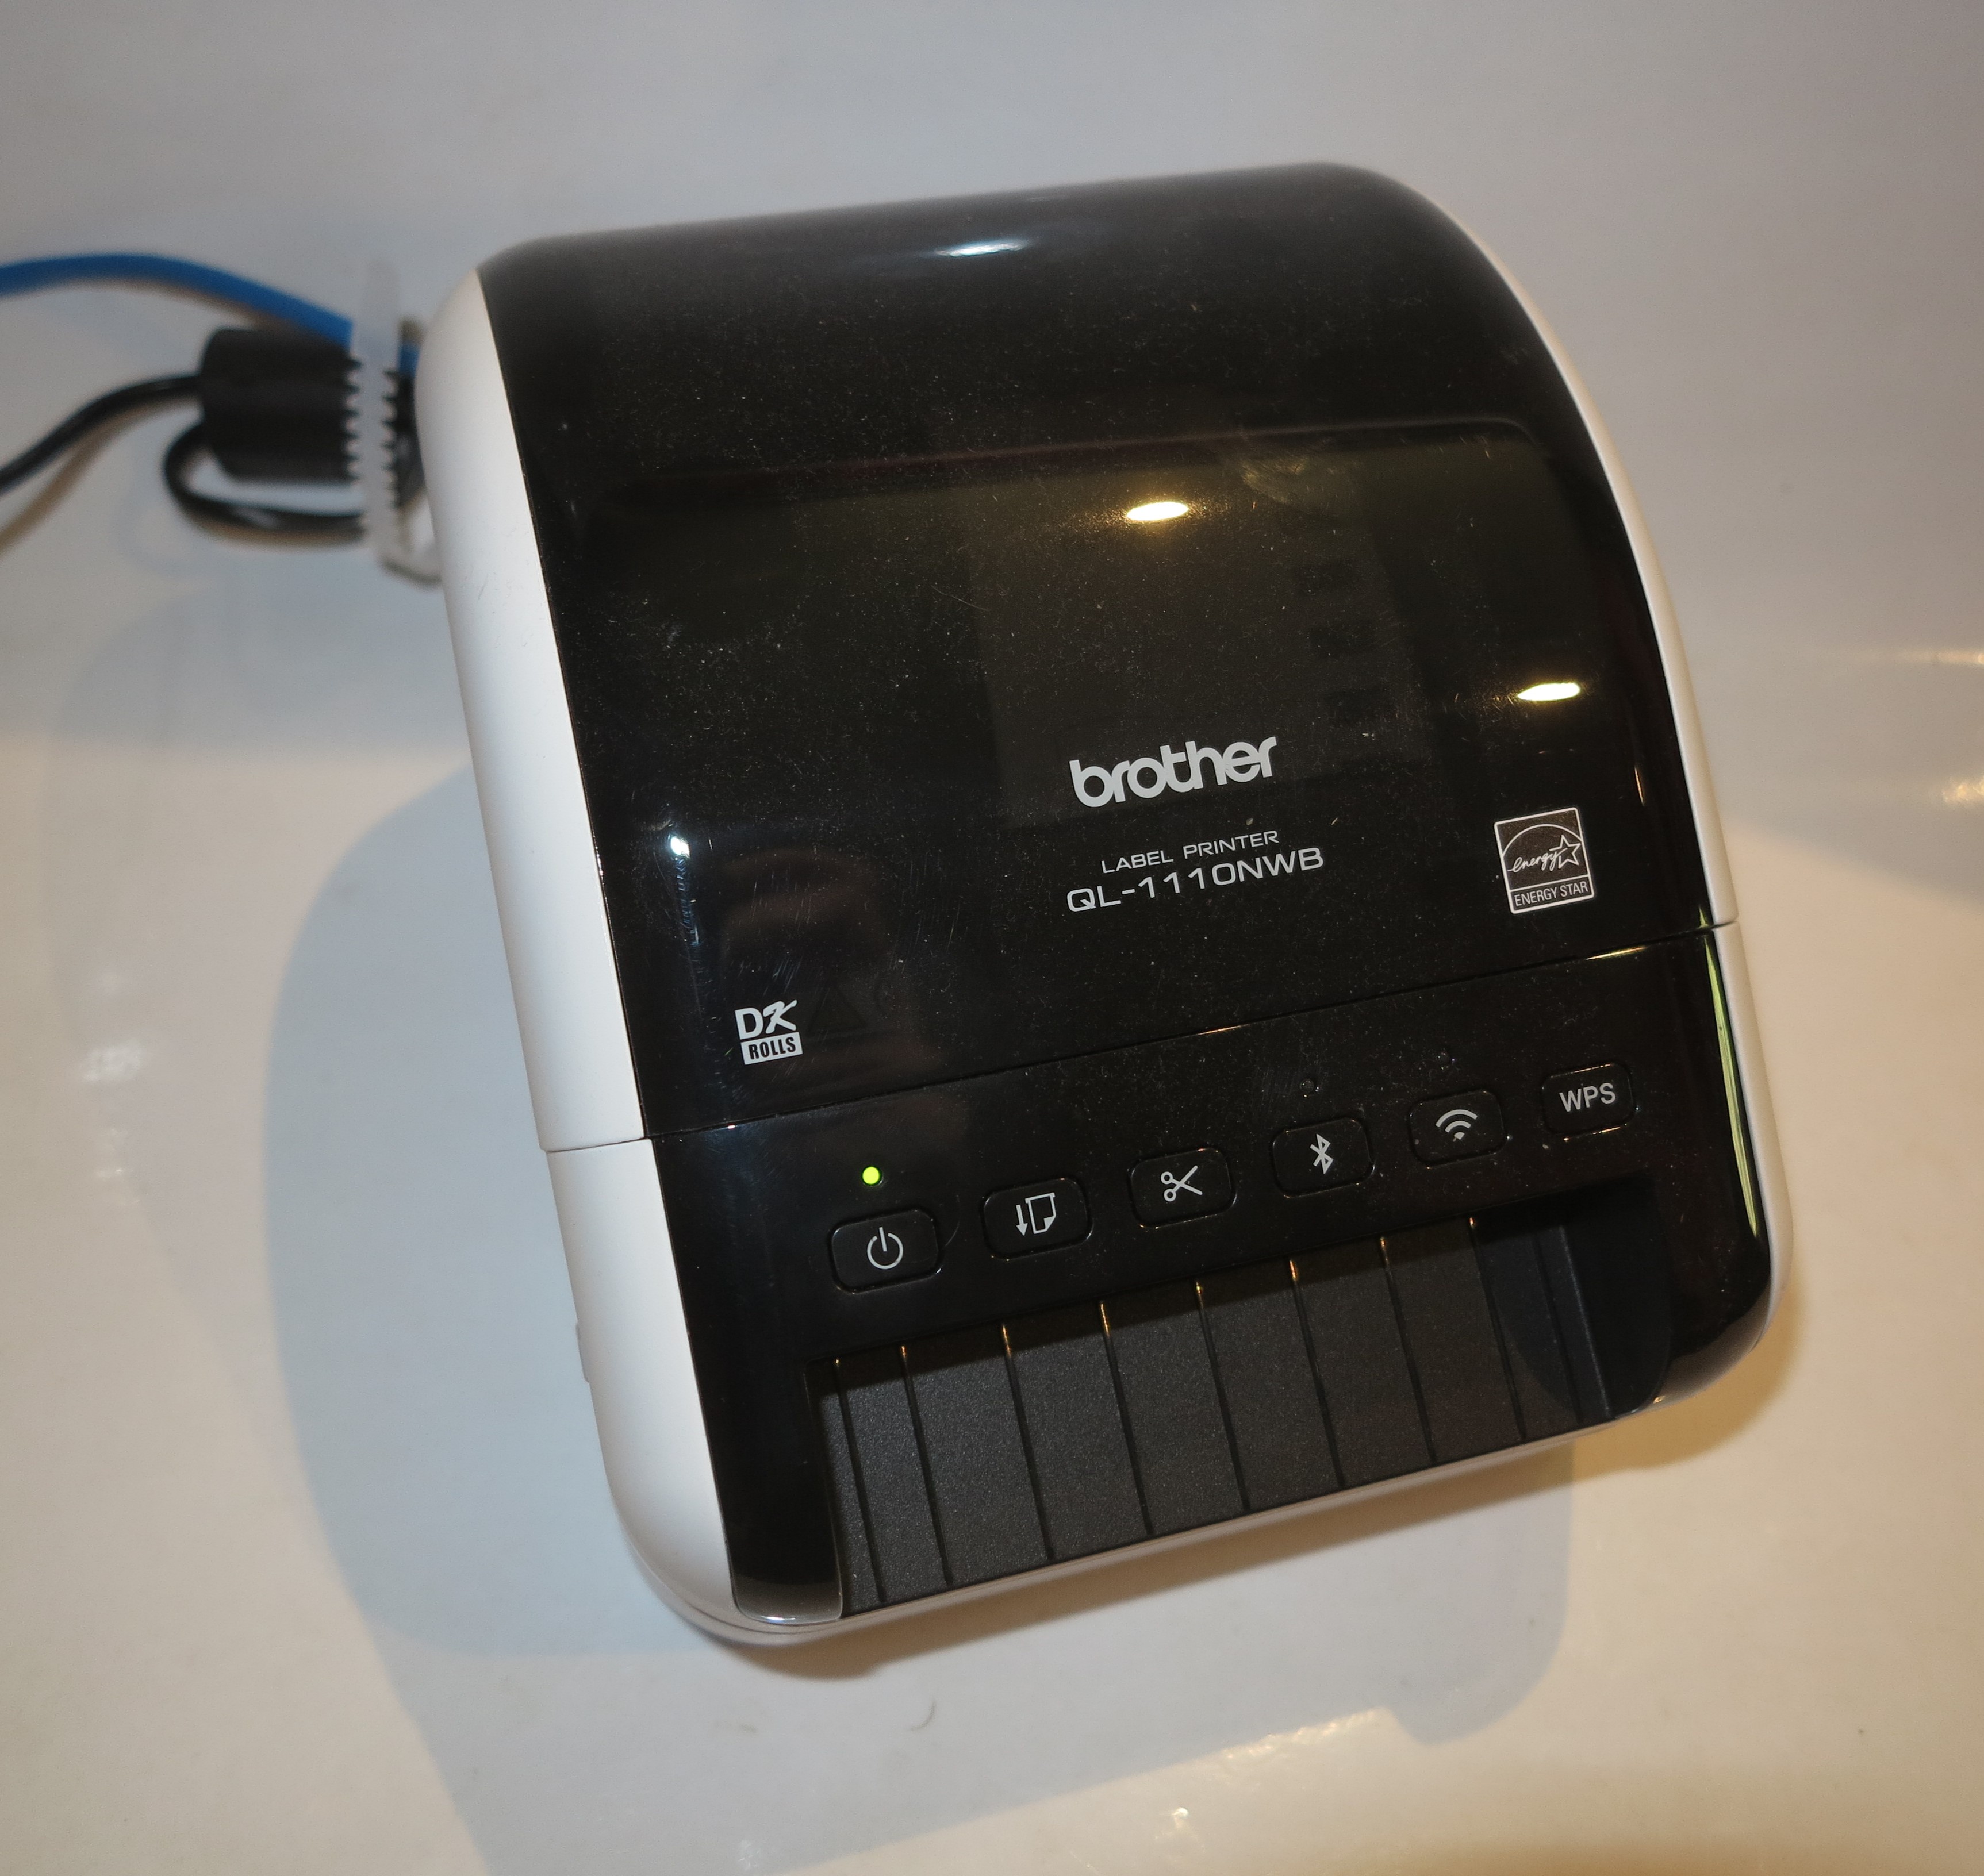 Product Review–Brother QL-1110NWB label printer